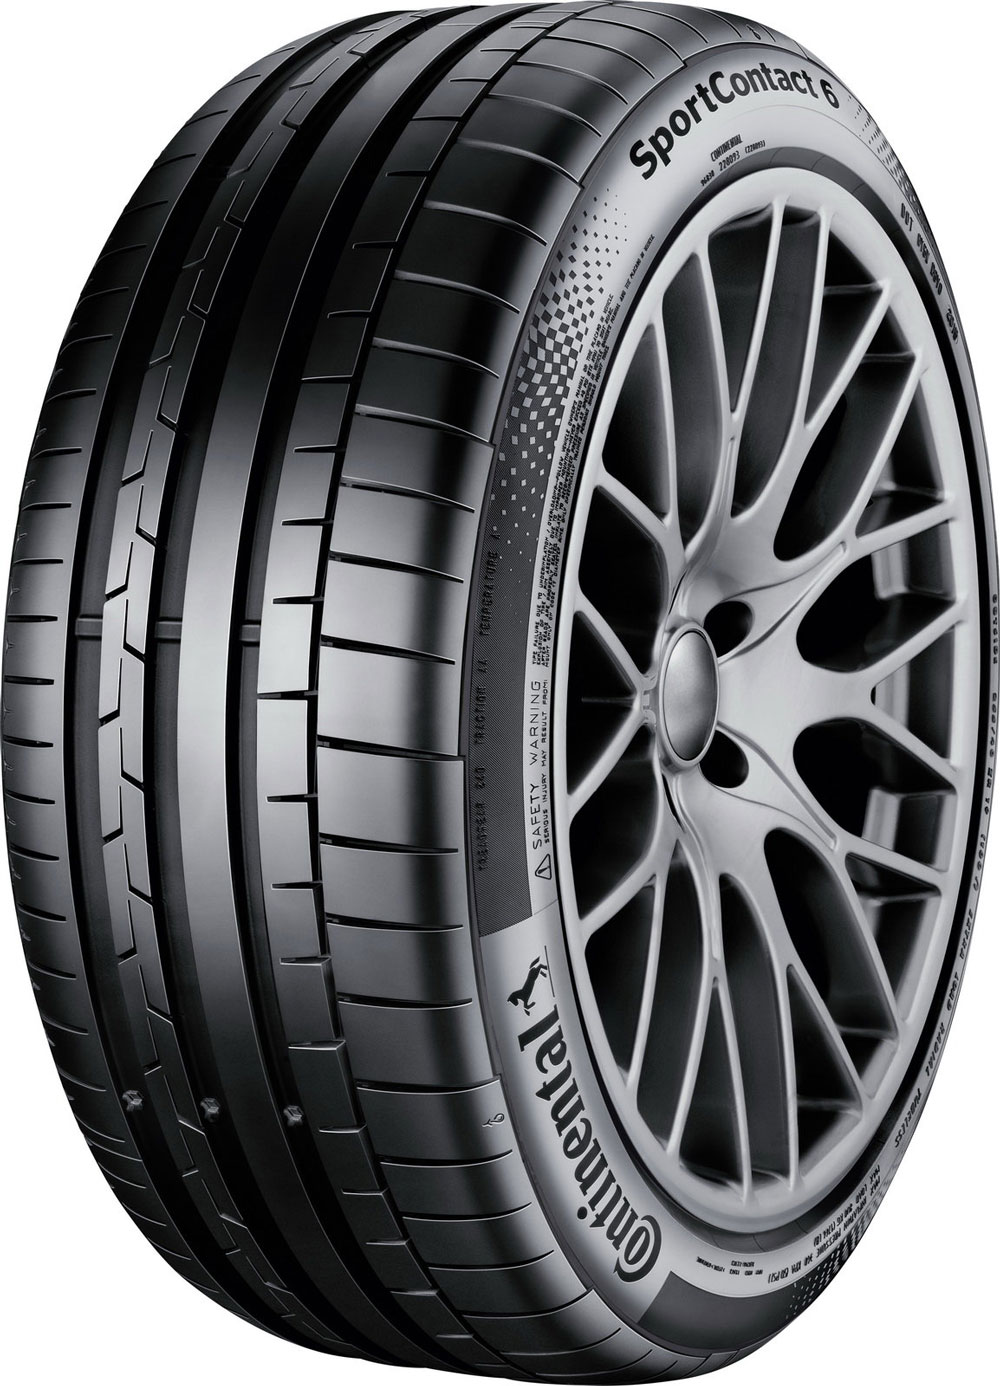 Гуми за кола CONTINENTAL SPORT CONTACT 6 XL 285/35 R21 105Y